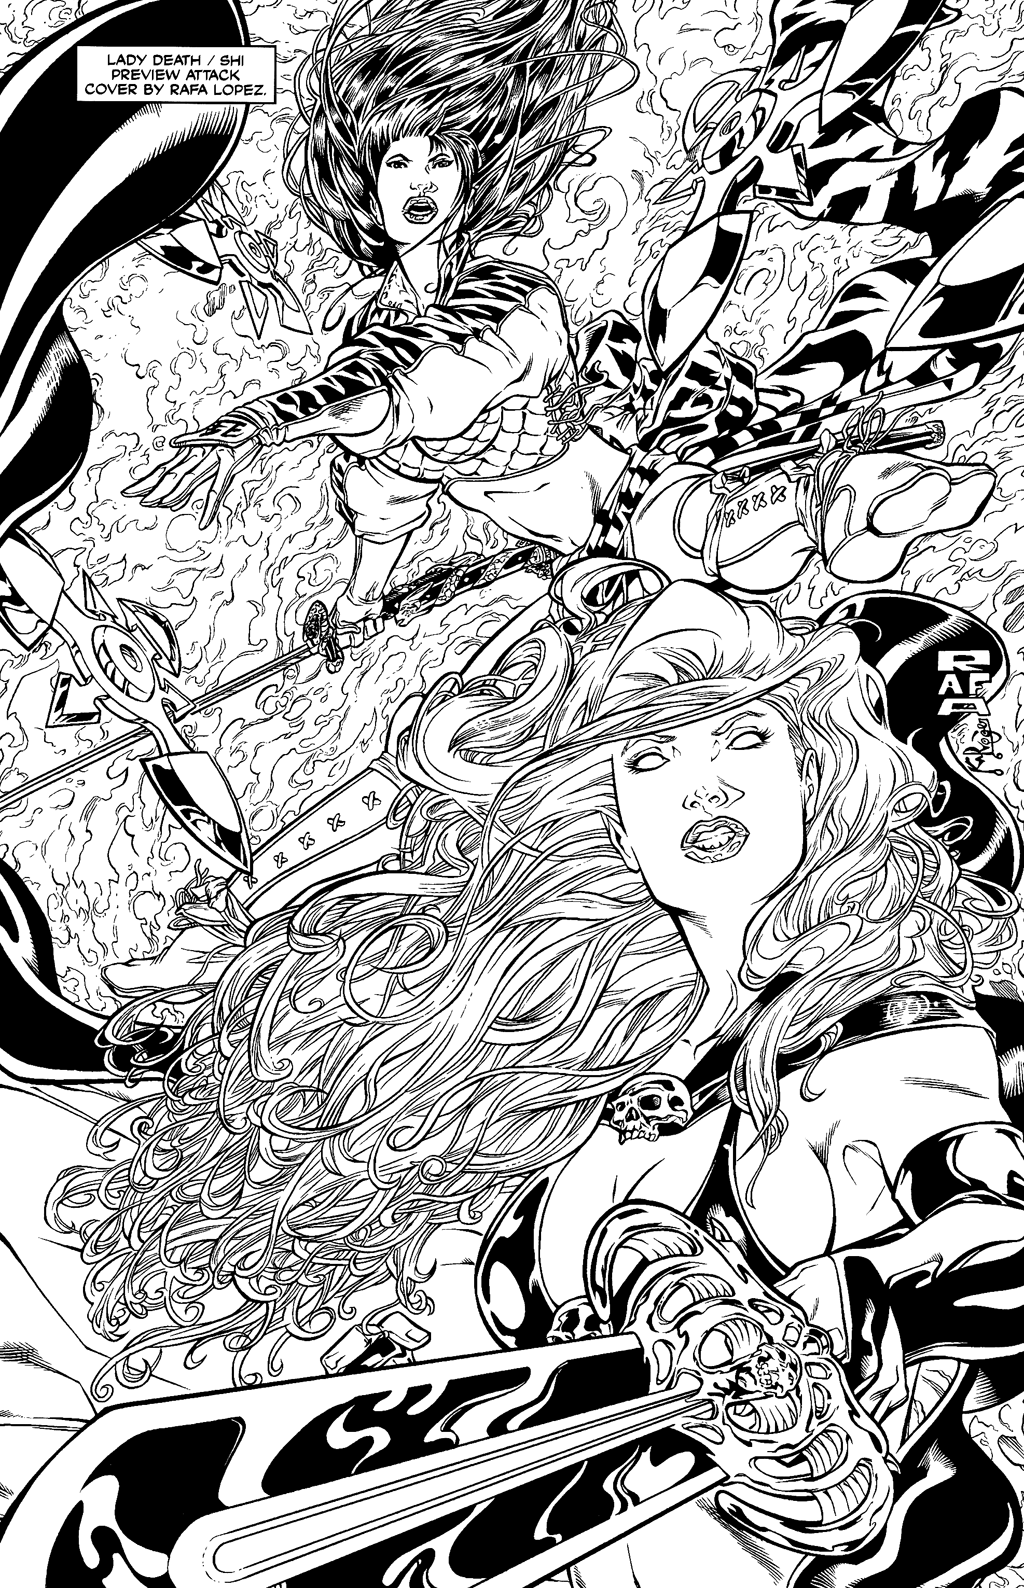 Read online Lady Death/Shi comic -  Issue # _Preview - 26